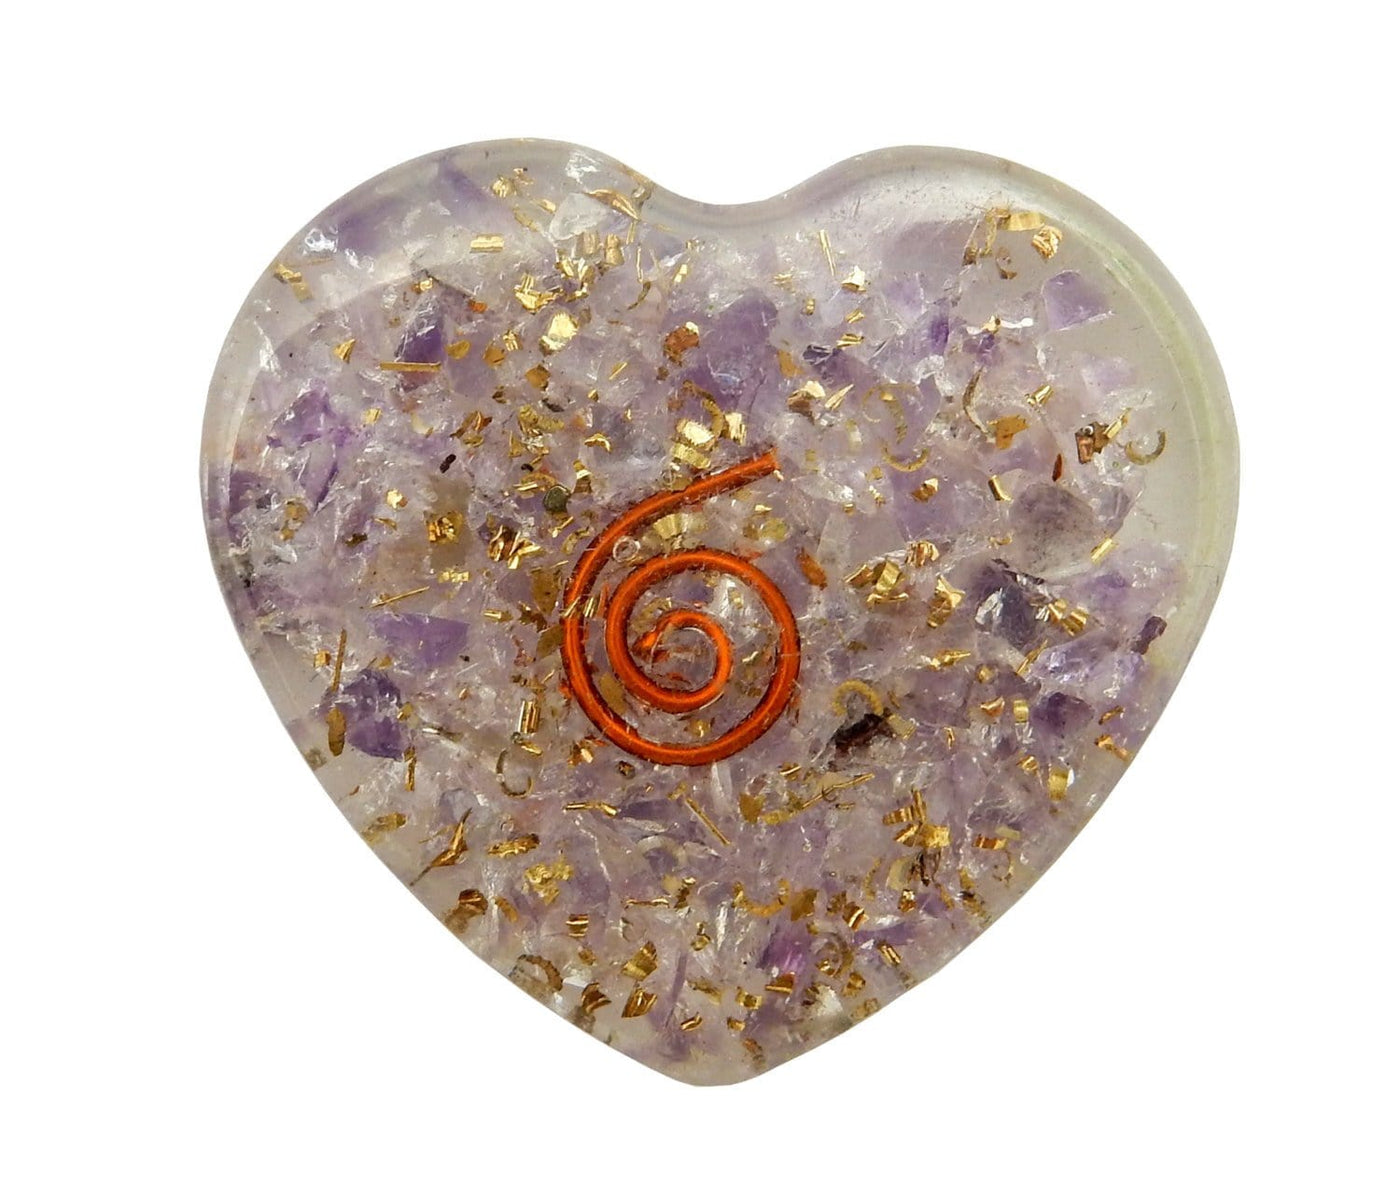  Orgone Heart Amethyst up close to show detail of the swirl wire stone chips golden flakes